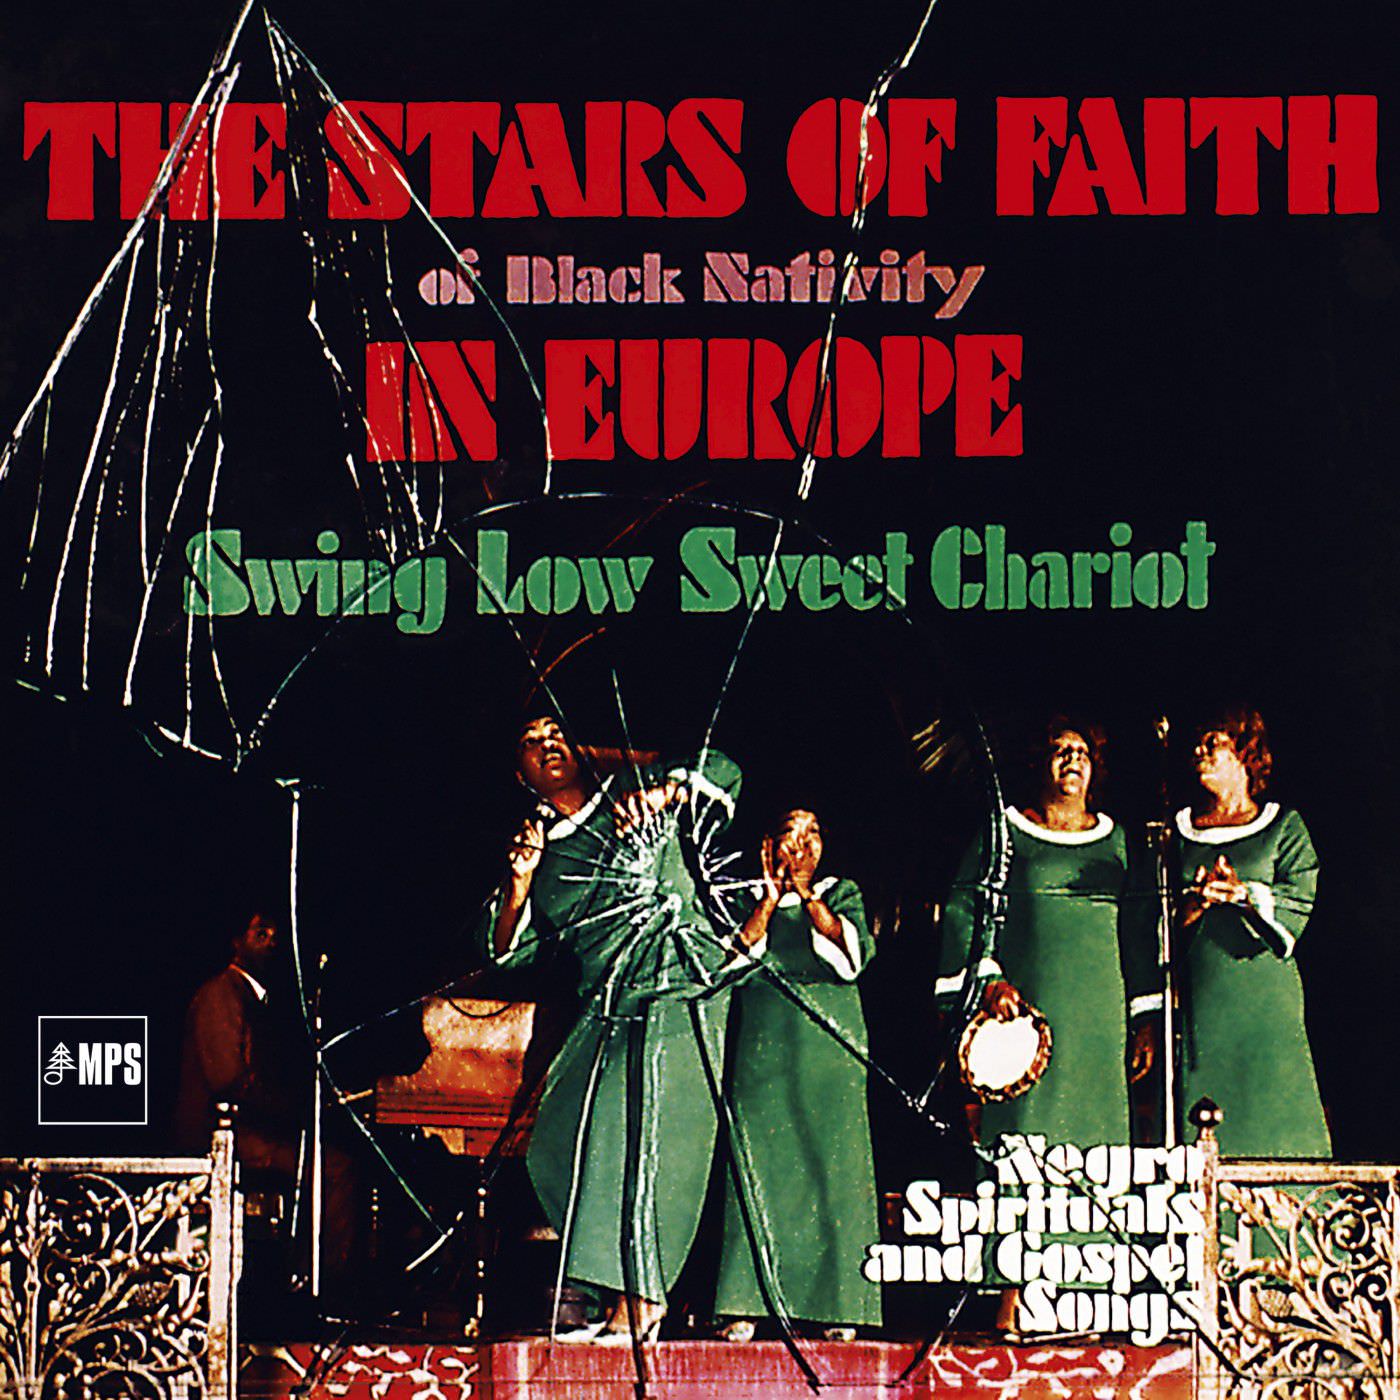 The Stars Of Faith Of Black Nativity – In Europe – Swing Low Sweet Chariot (Live) (1970/2017) [Qobuz FLAC 24bit/88,2kHz]